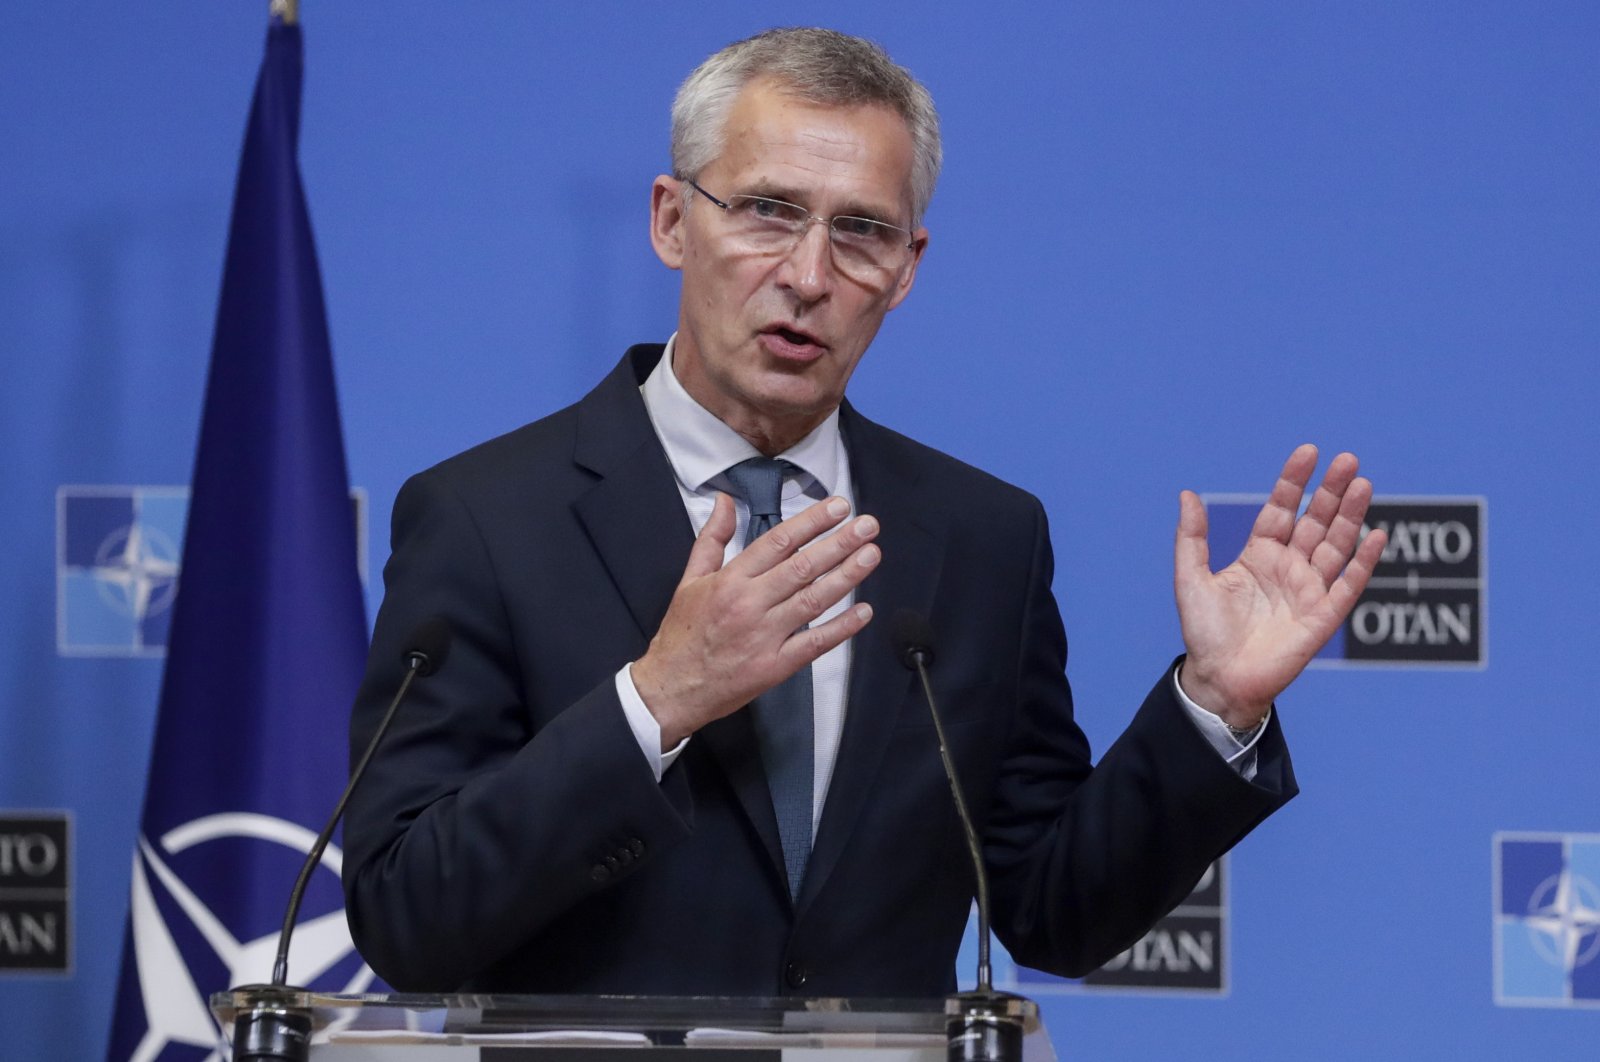 NATO Secretary-General Jens Stoltenberg speaks during a media conference after a meeting with Lithuanian Prime Minister Ingrida Simonyte at NATO headquarters in Brussels, Belgium, June 3, 2021. (AP Photo)